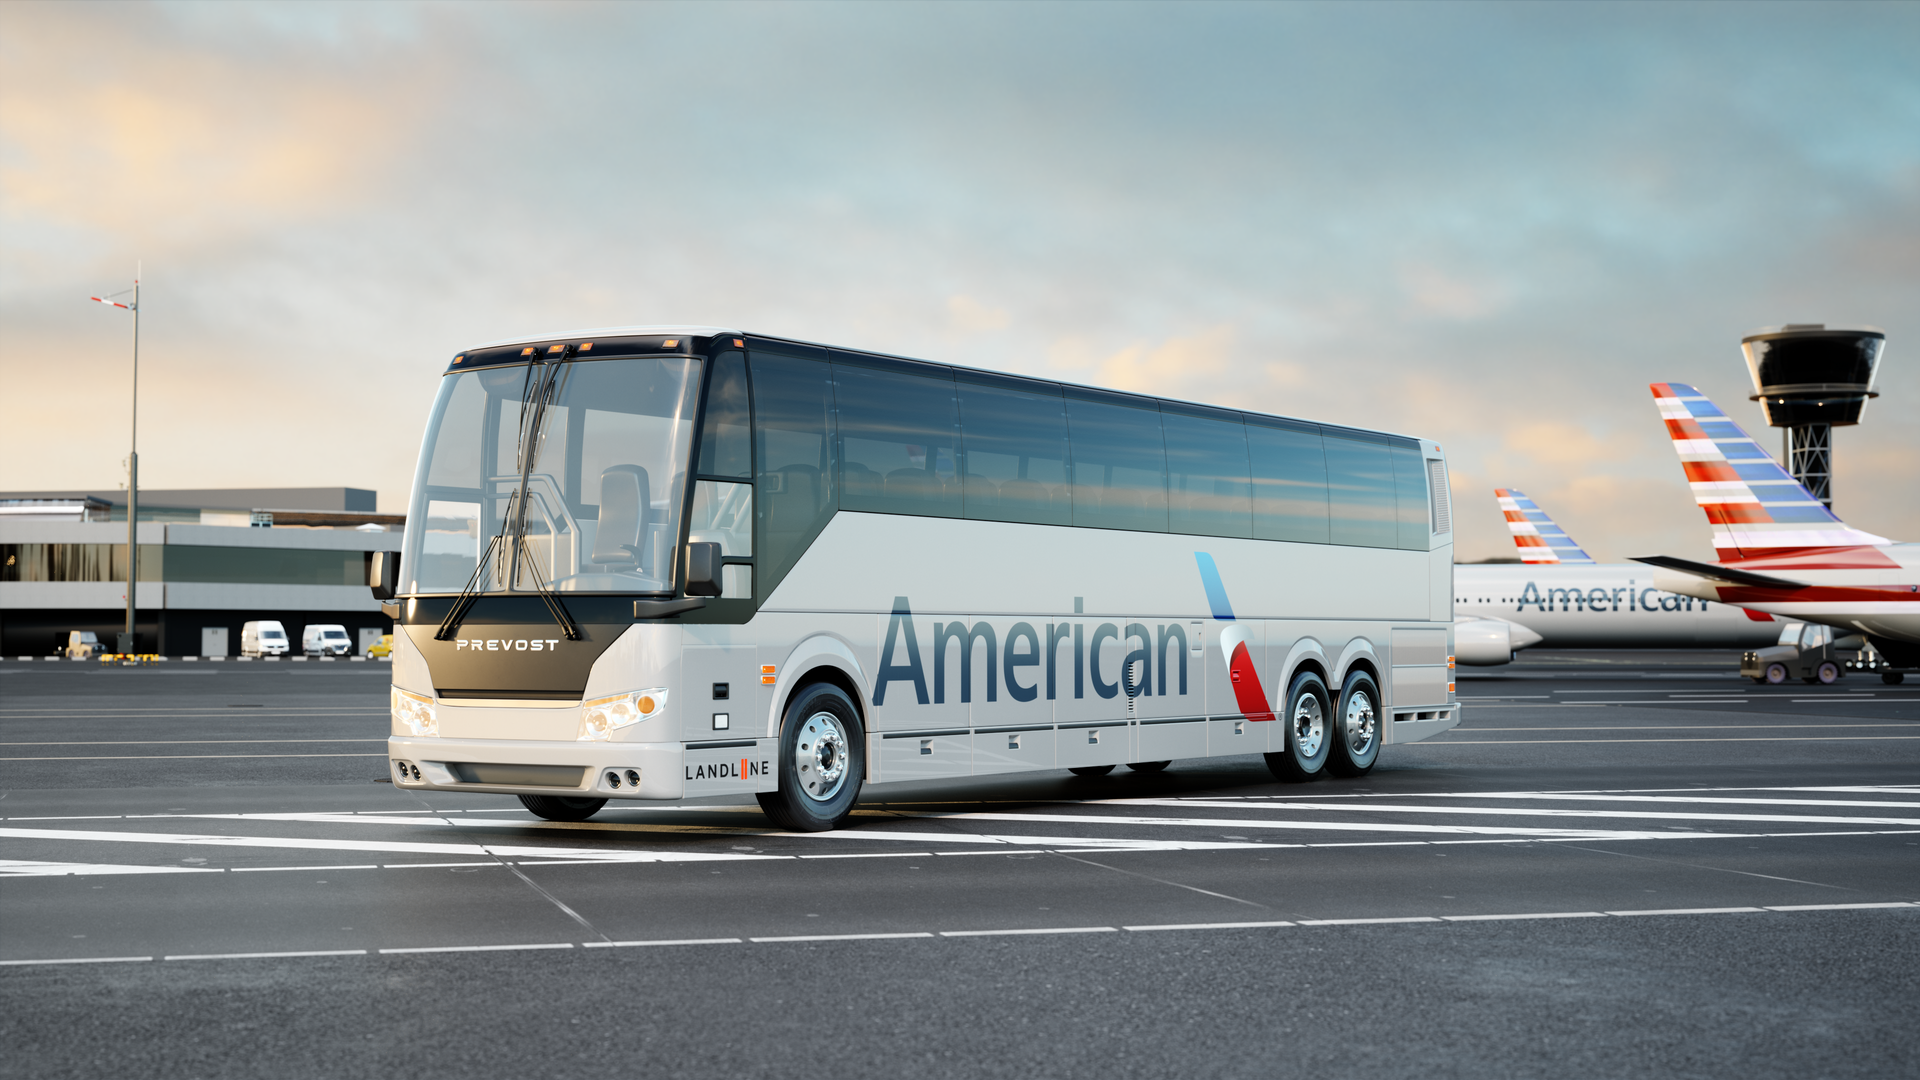 A white bus emblazoned with the logo of American Airlines